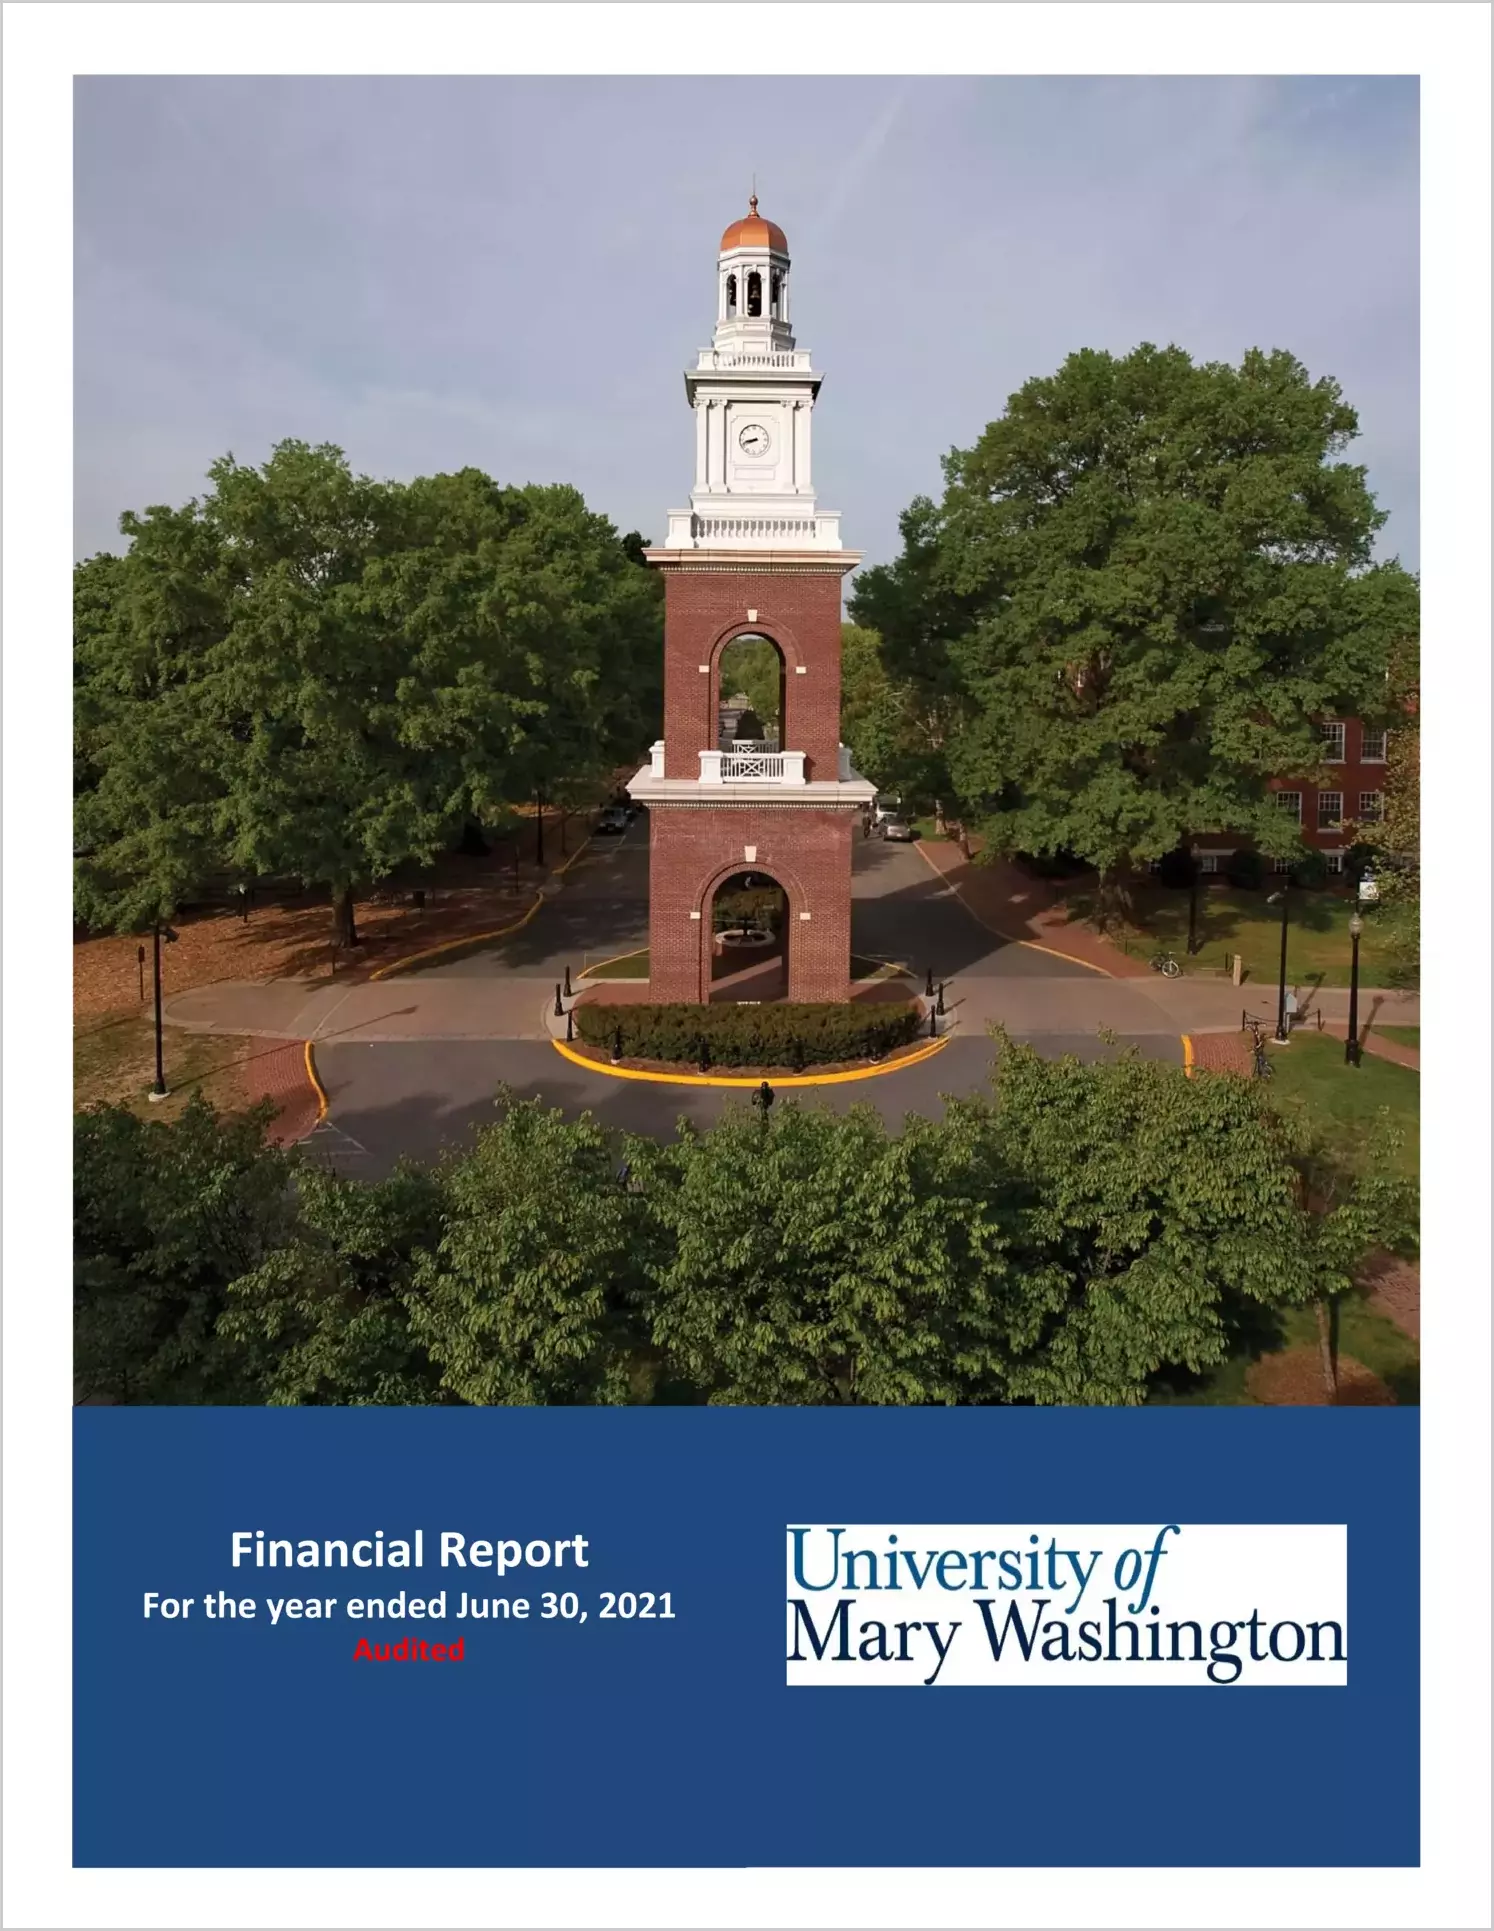 University of Mary Washington Financial Statements for the year ended June 30, 2021